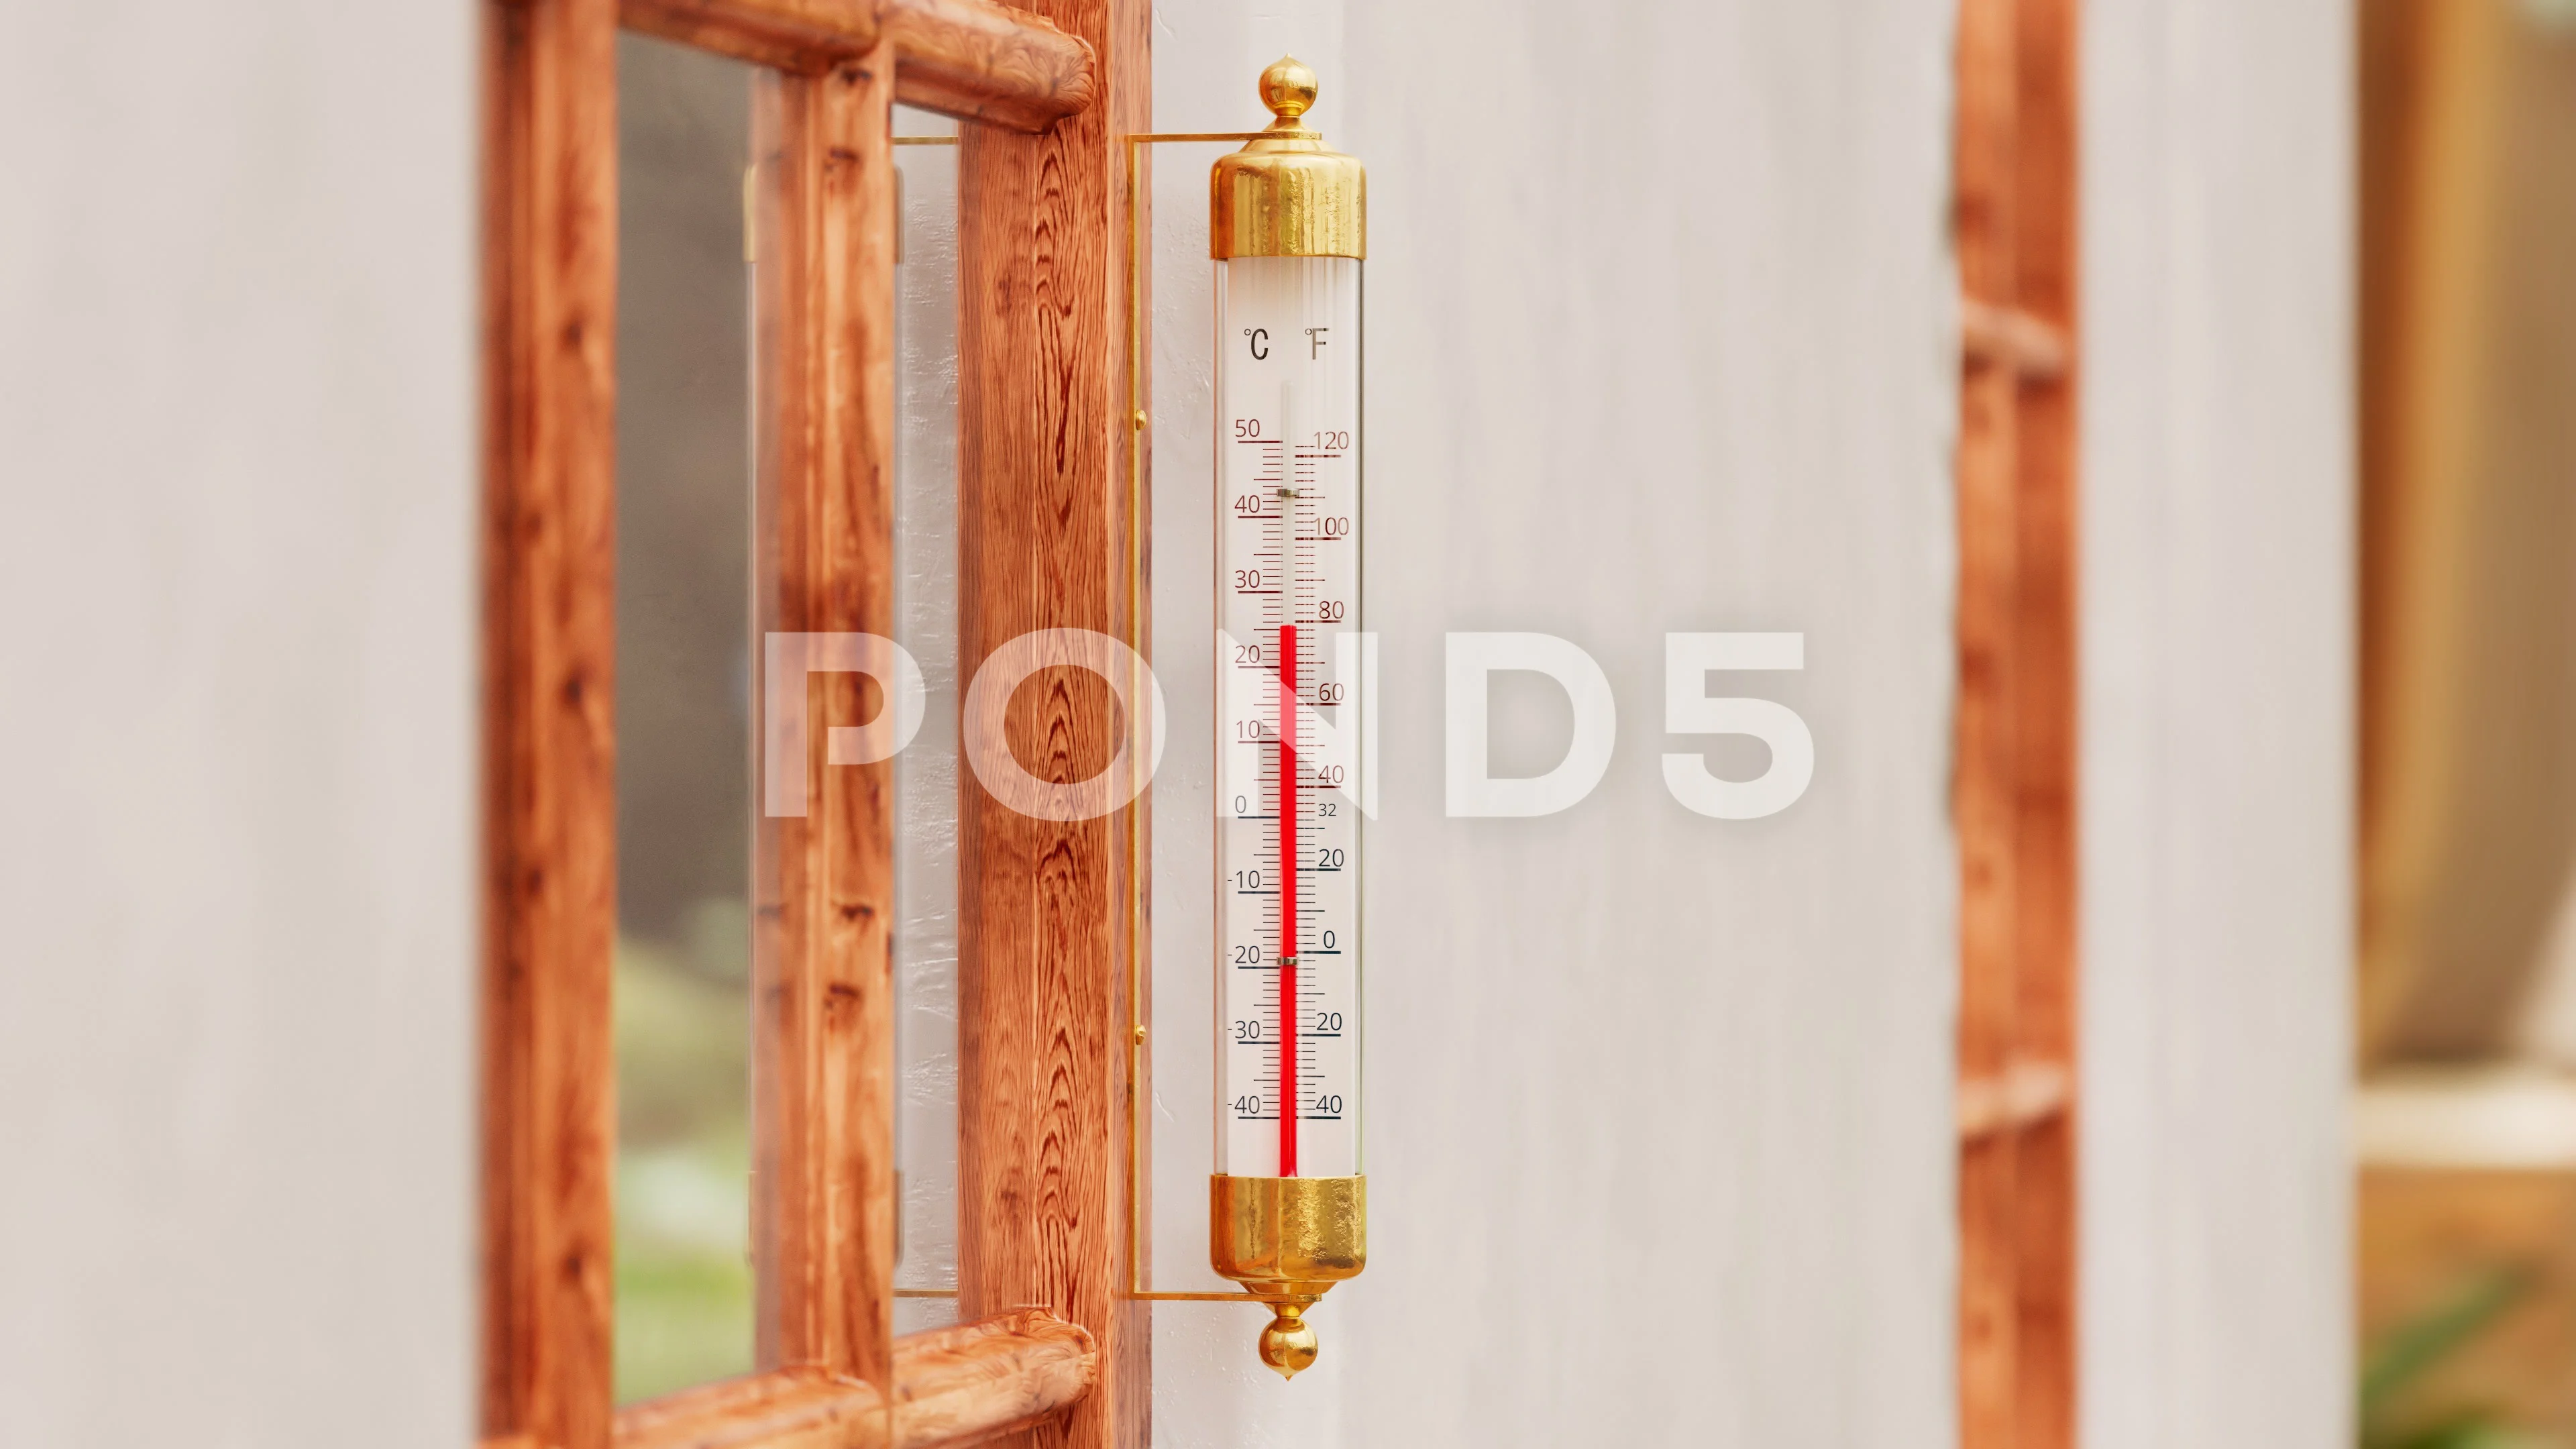 https://images.pond5.com/outdoor-thermometer-garden-attached-wooden-footage-139750060_prevstill.jpeg